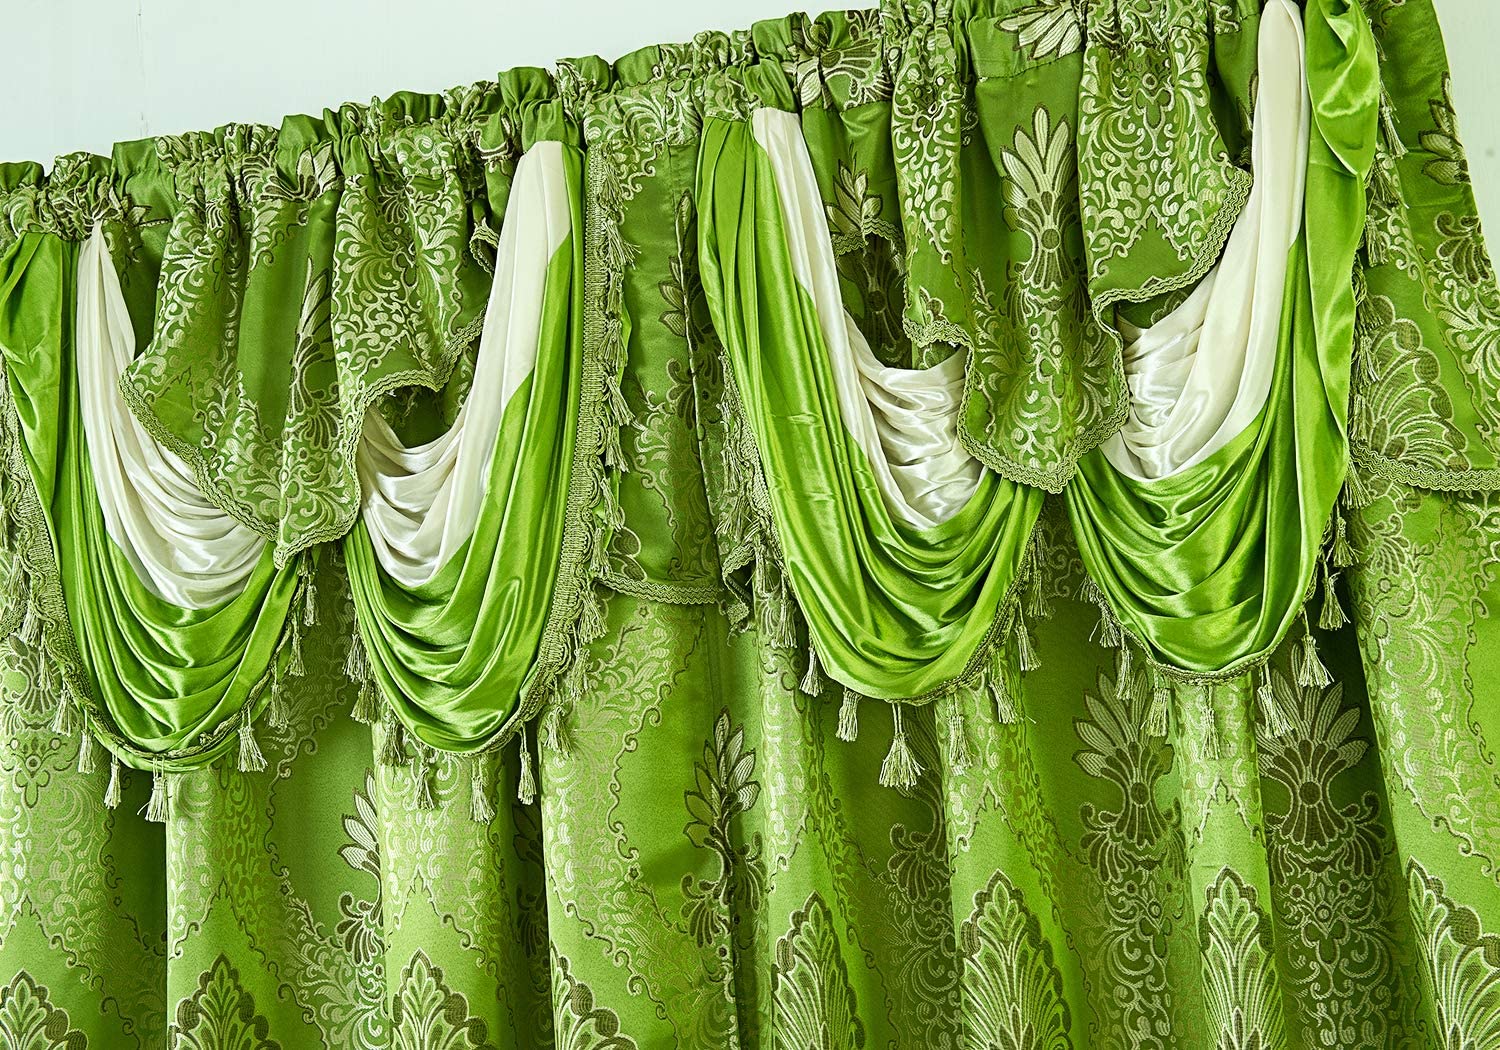 Milton Floral/Damask Textured Jacquard 54 x 84 in. Single Rod Pocket Curtain Panel w/ Attached 18 in. Valance - Linen Universe Co.